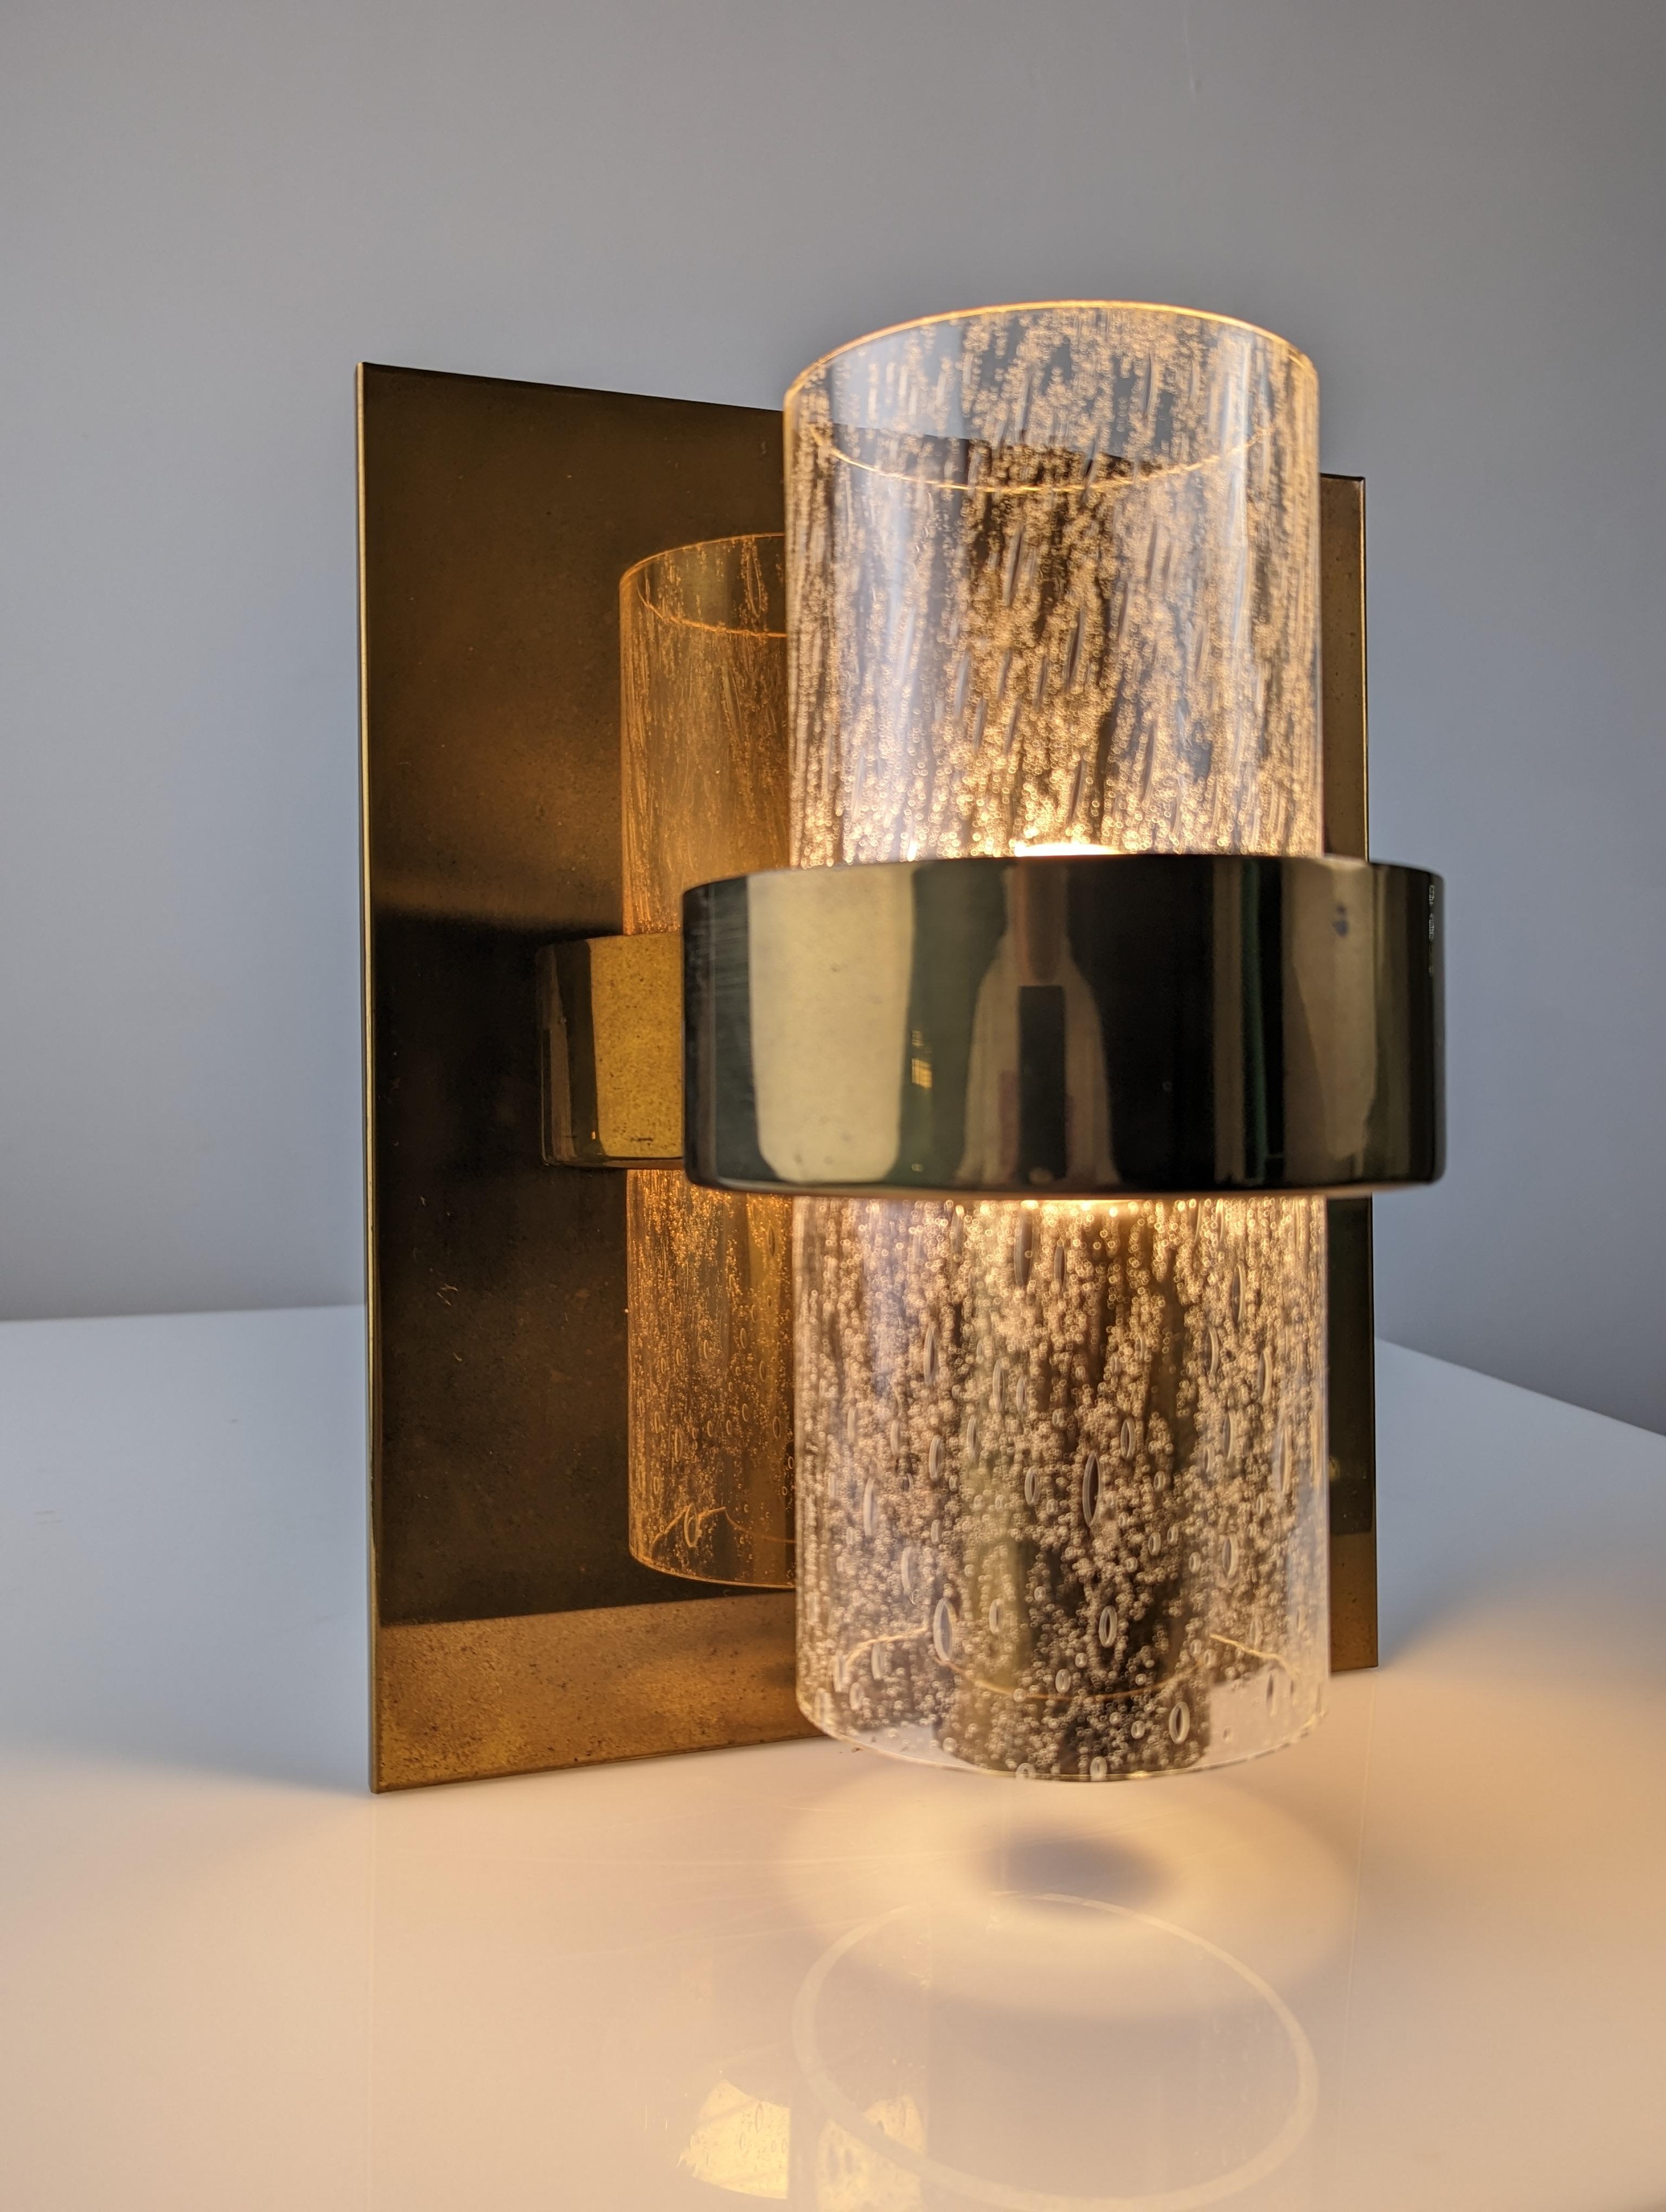 Exceptional wall lamp with brass structure and bubble glass shade. Designed by Jonas Hidle and made in Norway by Høvik Lys AS from the second half of circa 1970. Shades are probably made by Hadeland Glassverk AS.